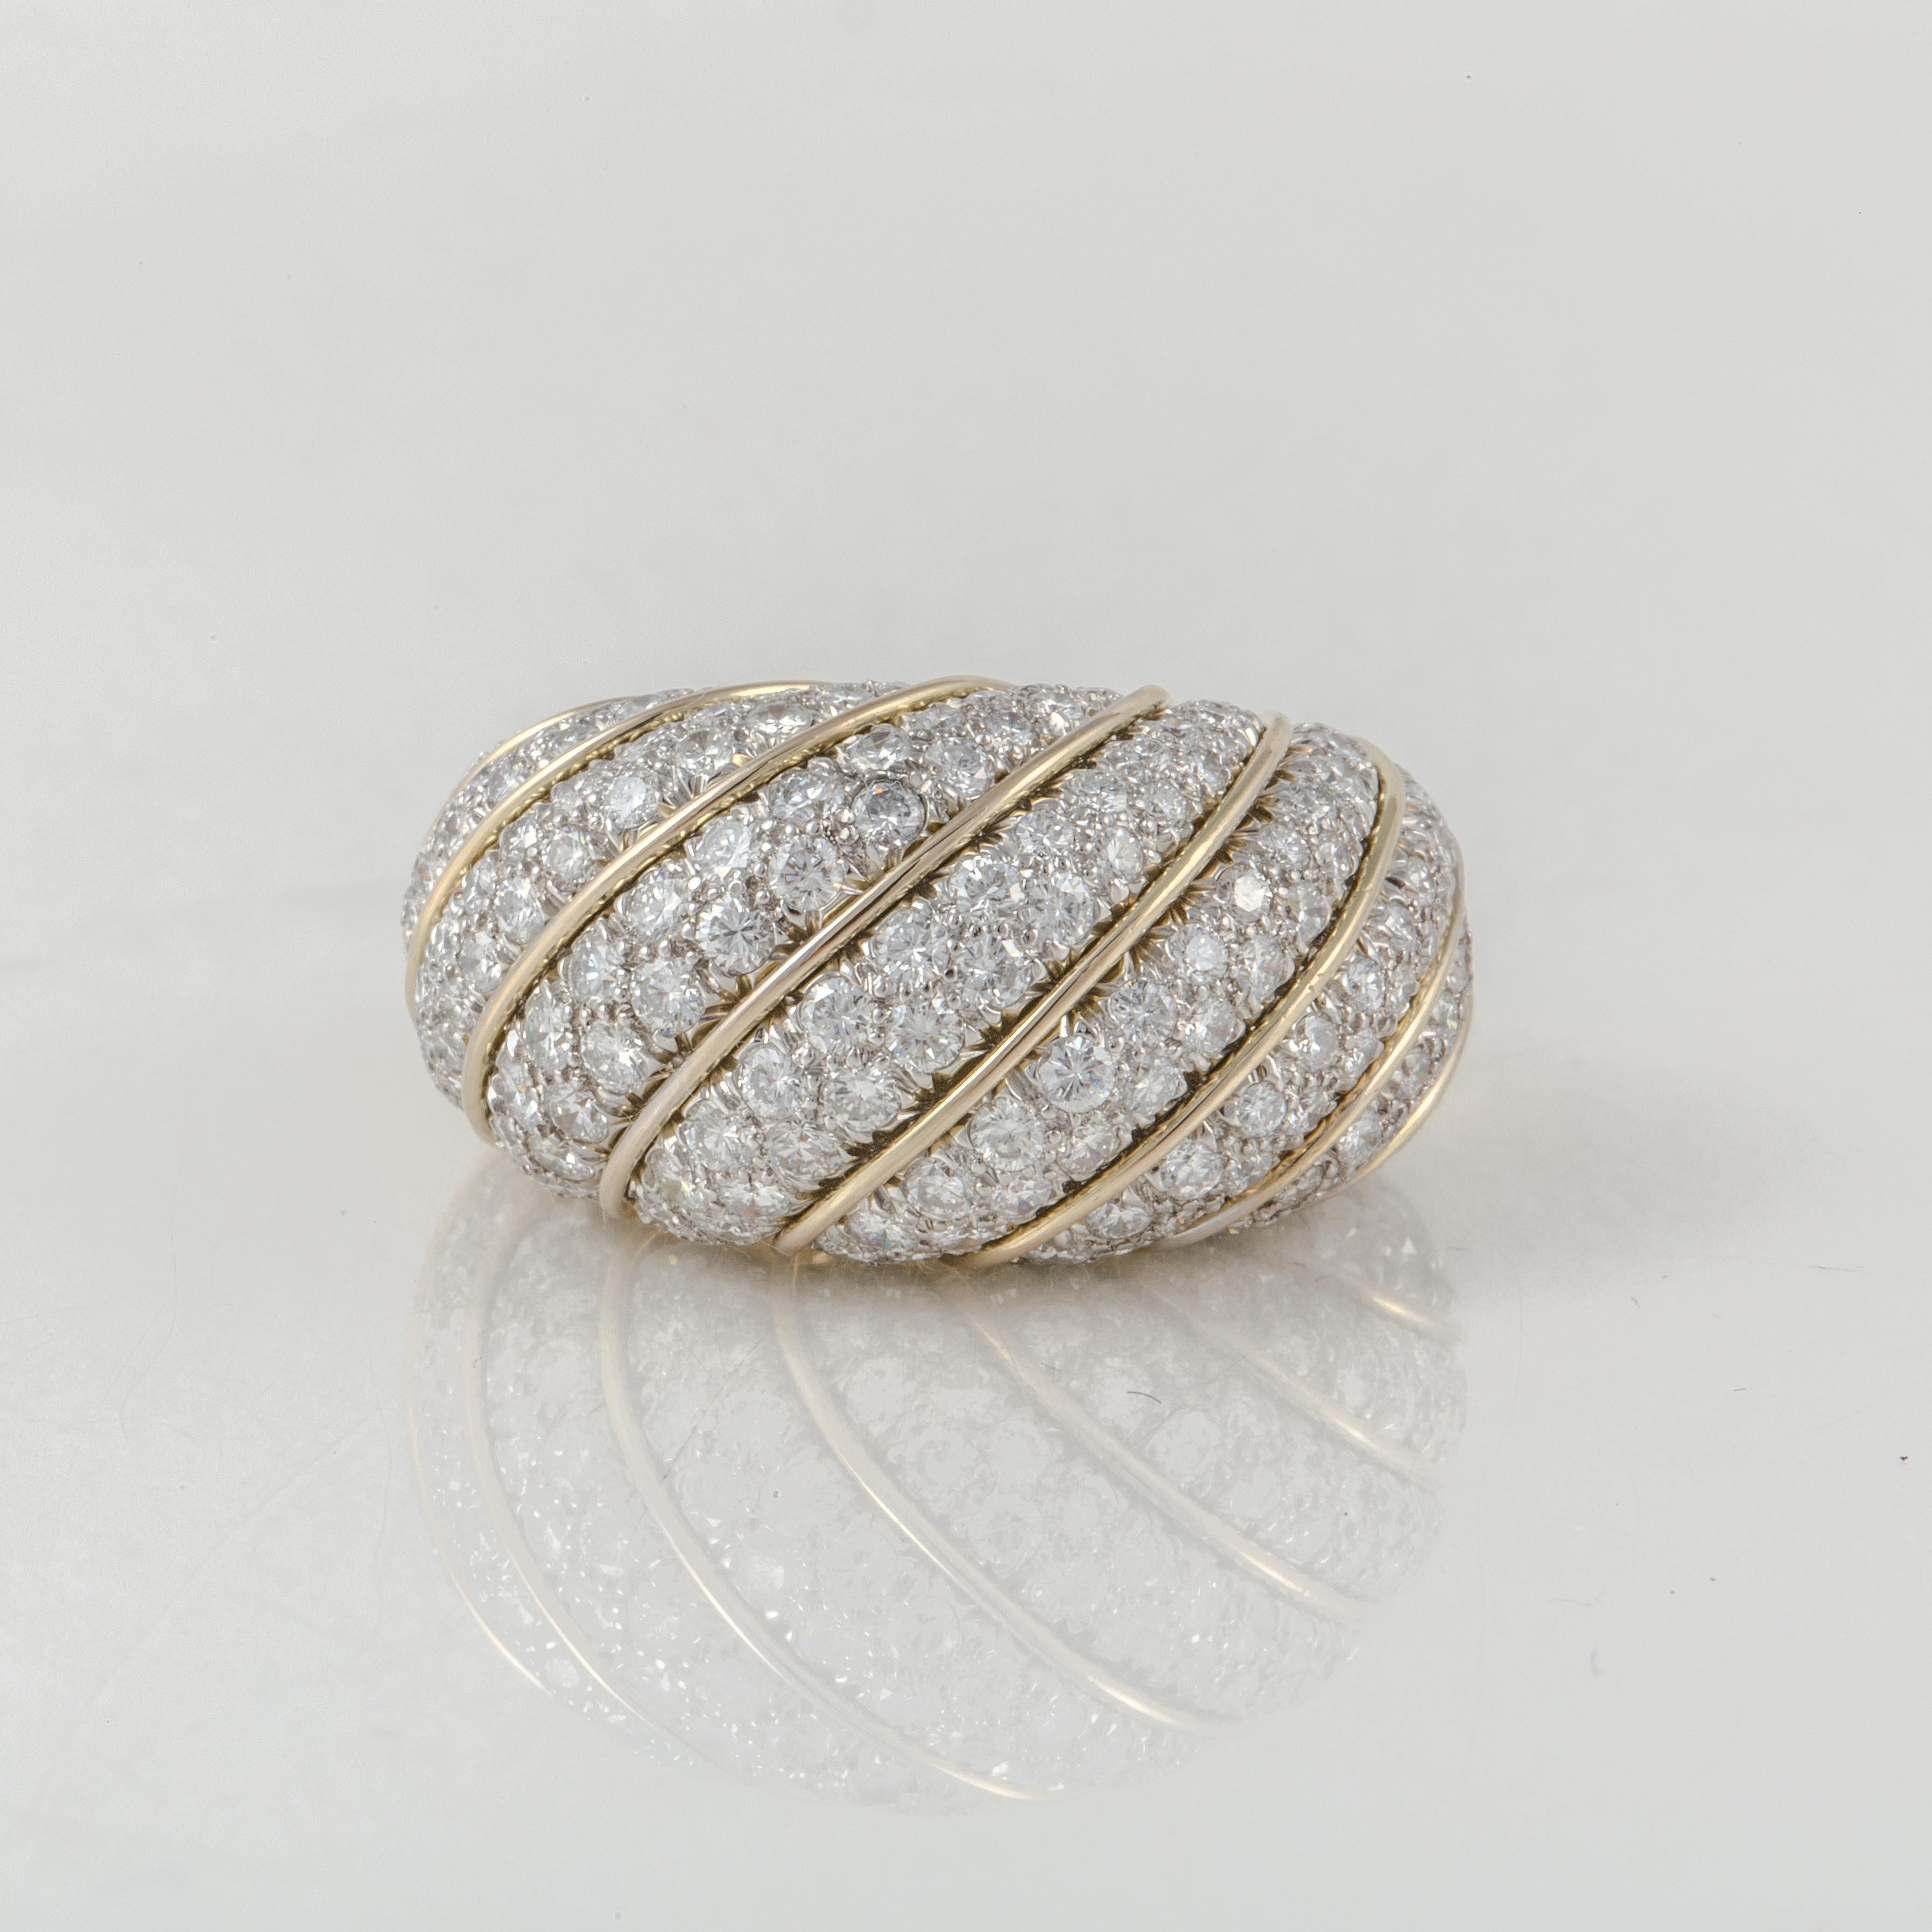 Dome ring composed of 18K yellow gold and platinum with pavé round diamonds.  There is a total of 181 round diamonds that total 5.40 carats; G-H color and VS1-2 clarity.  Measures 1 1/16 inches long, 9/16 inches wide and stands 1/2 inch off the